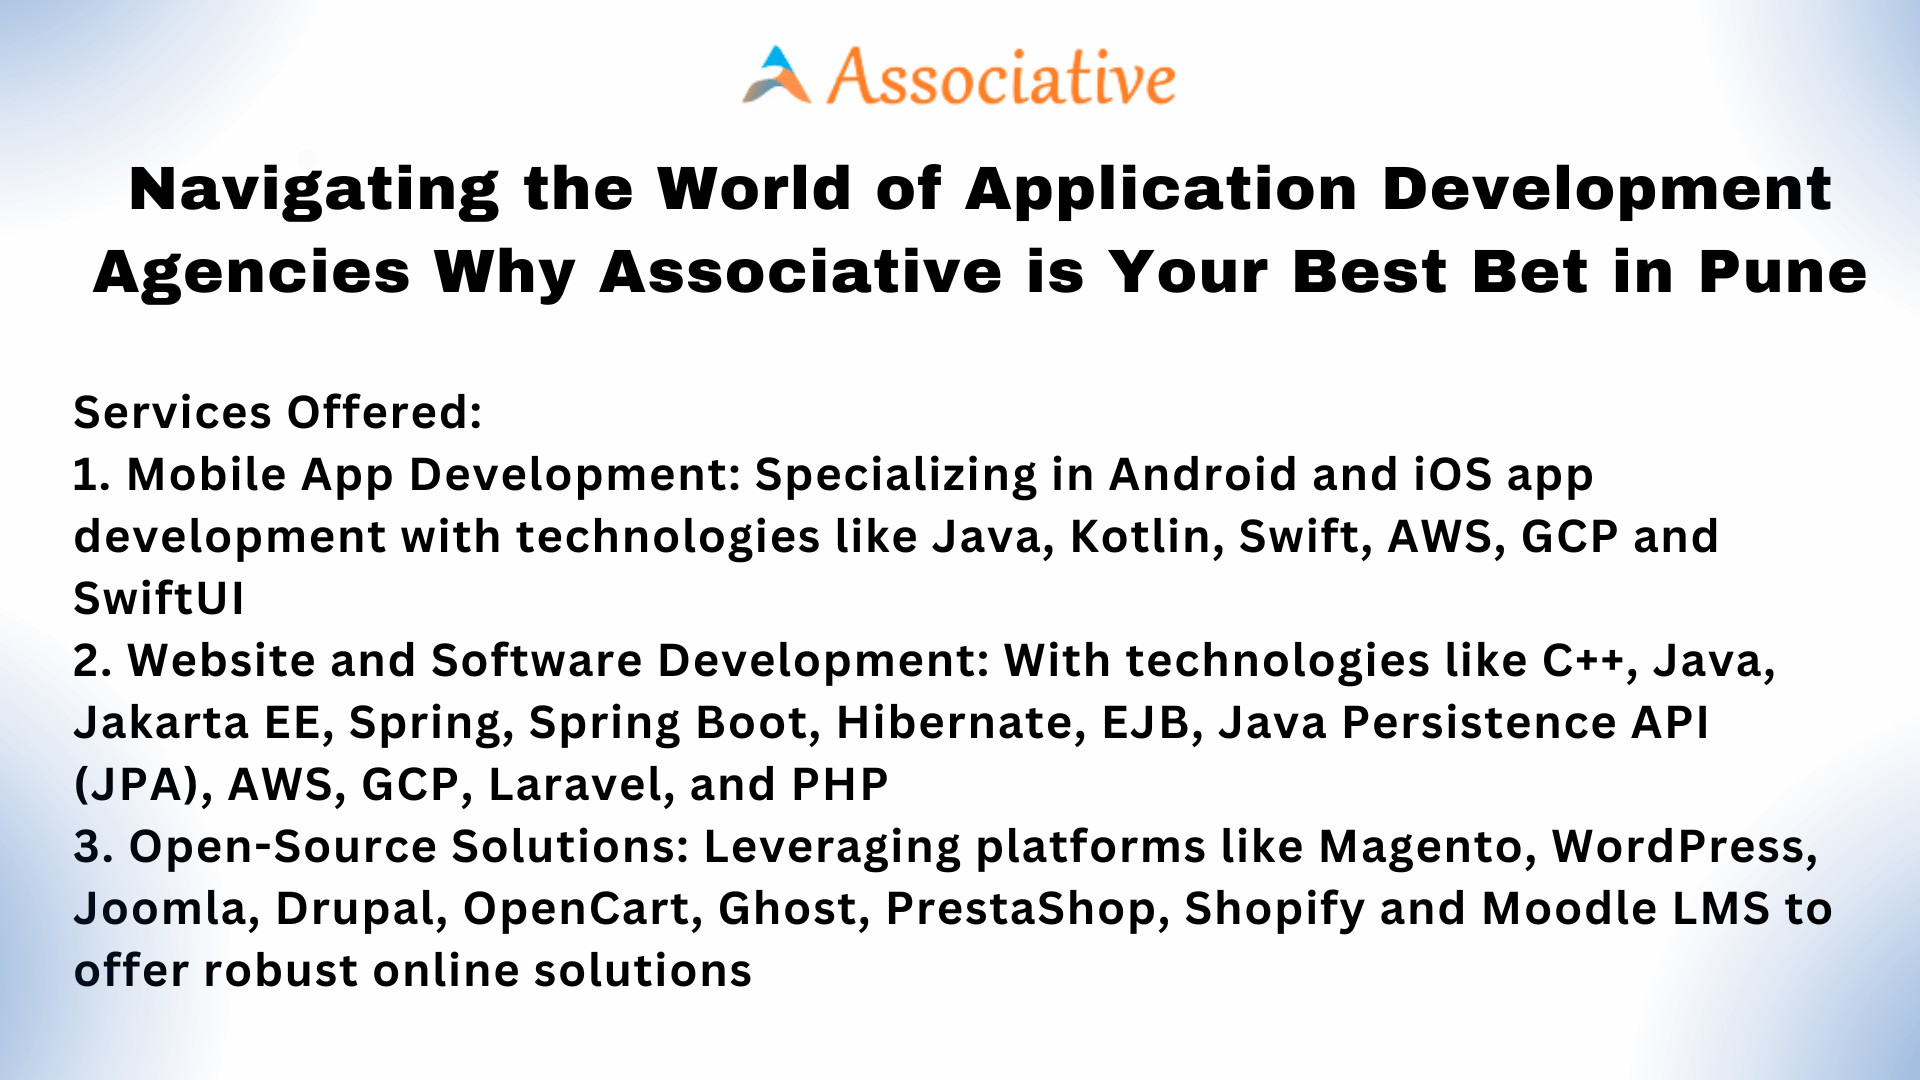 Navigating the World of Application Development Agencies Why Associative is Your Best Bet in Pune